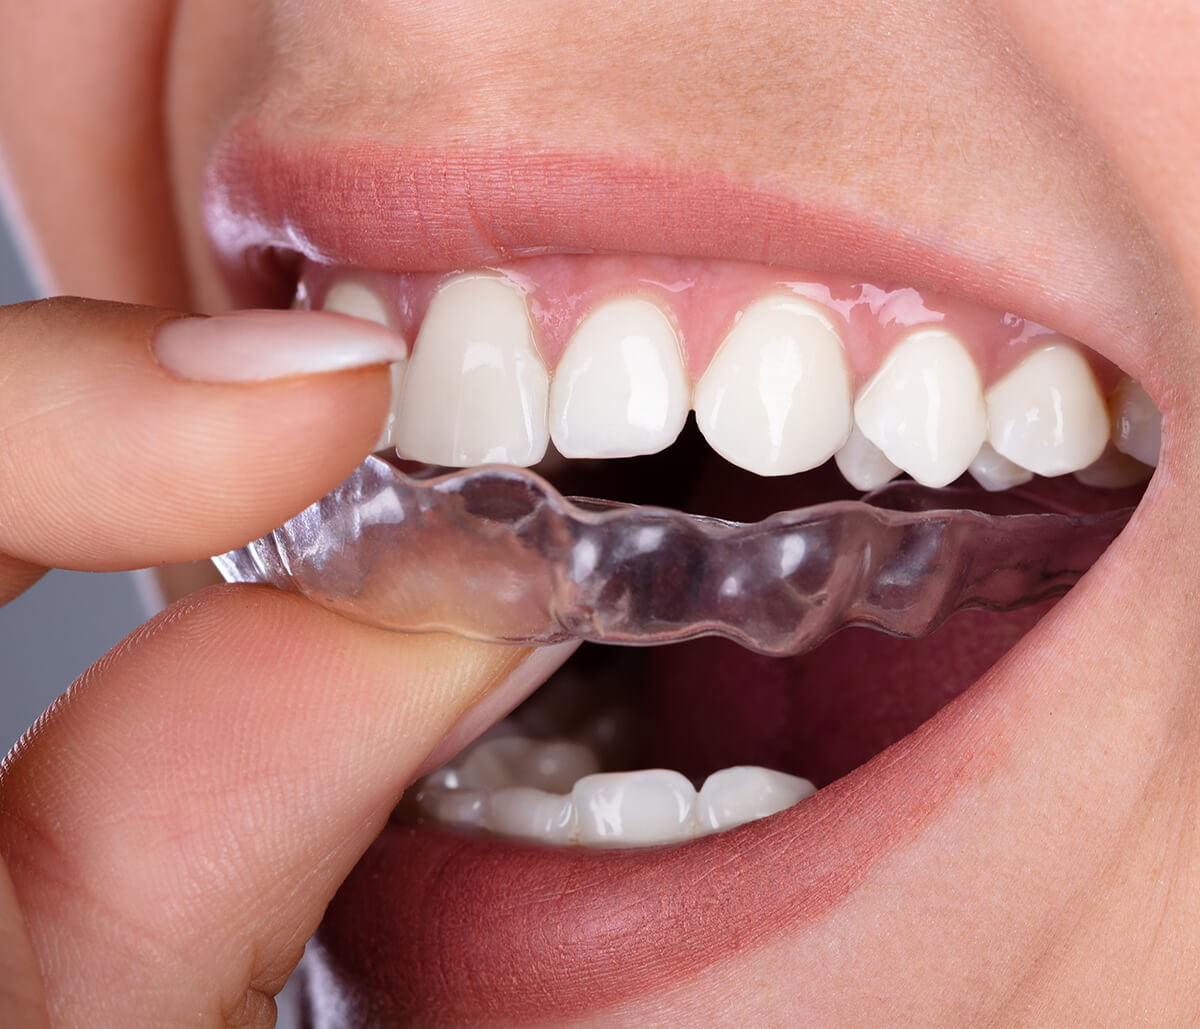 Invisalign® is a great value and alternative to braces for comfortable, precise treatment